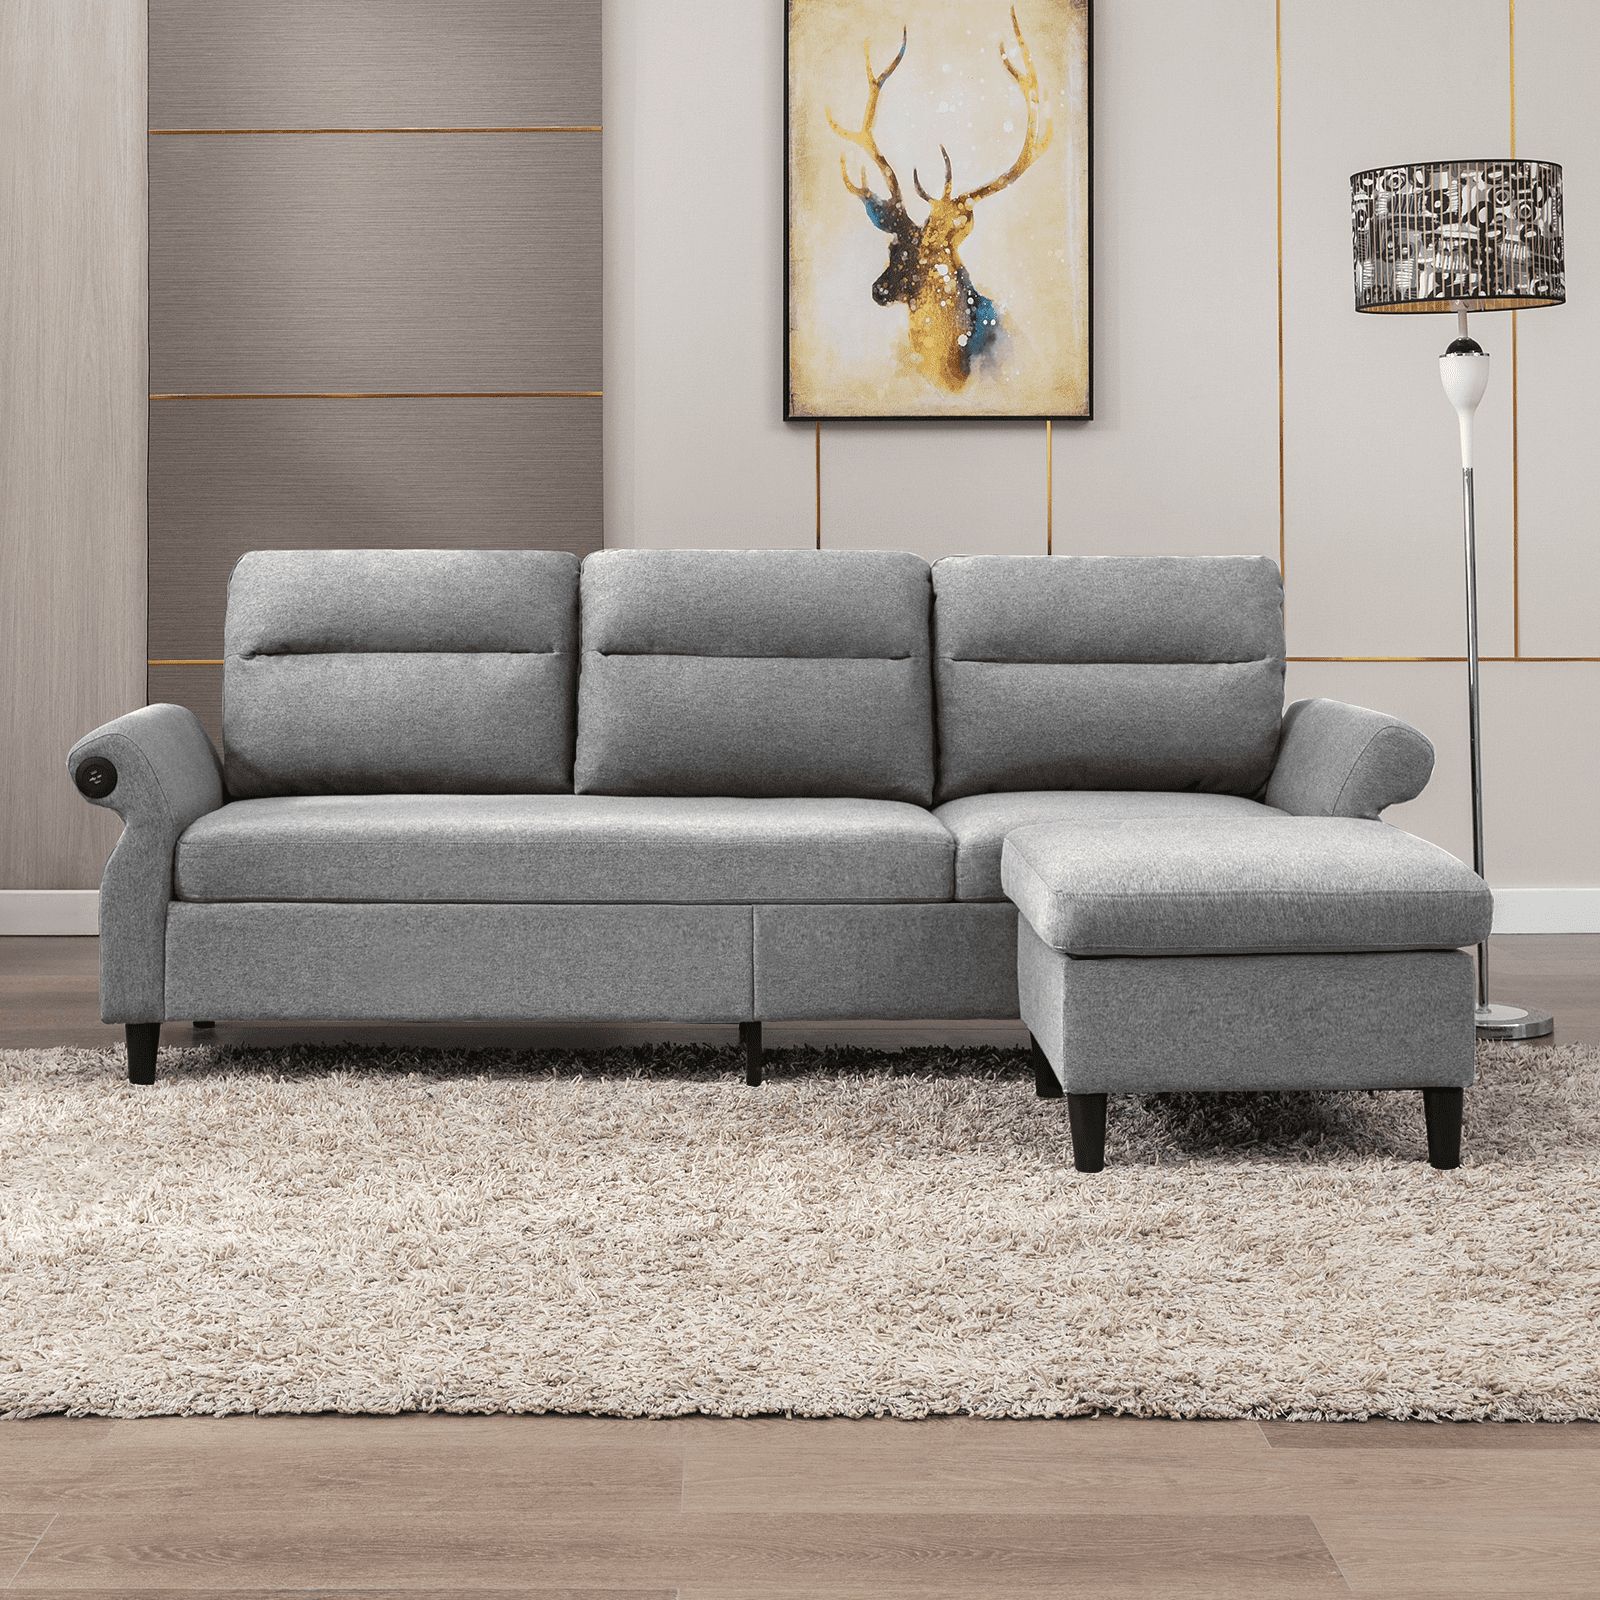 Muzz Convertible Sectional Sofa Couch, 3 Seat L Shape Sofa Couch With 2 Usb  Ports And Adjustable Armrest, Small Reversible Sectional Couches With  Ottoman For Living Room, Apartment, Light Grey – Walmart Regarding Adjustable Armrest Sofa Couches (View 3 of 15)